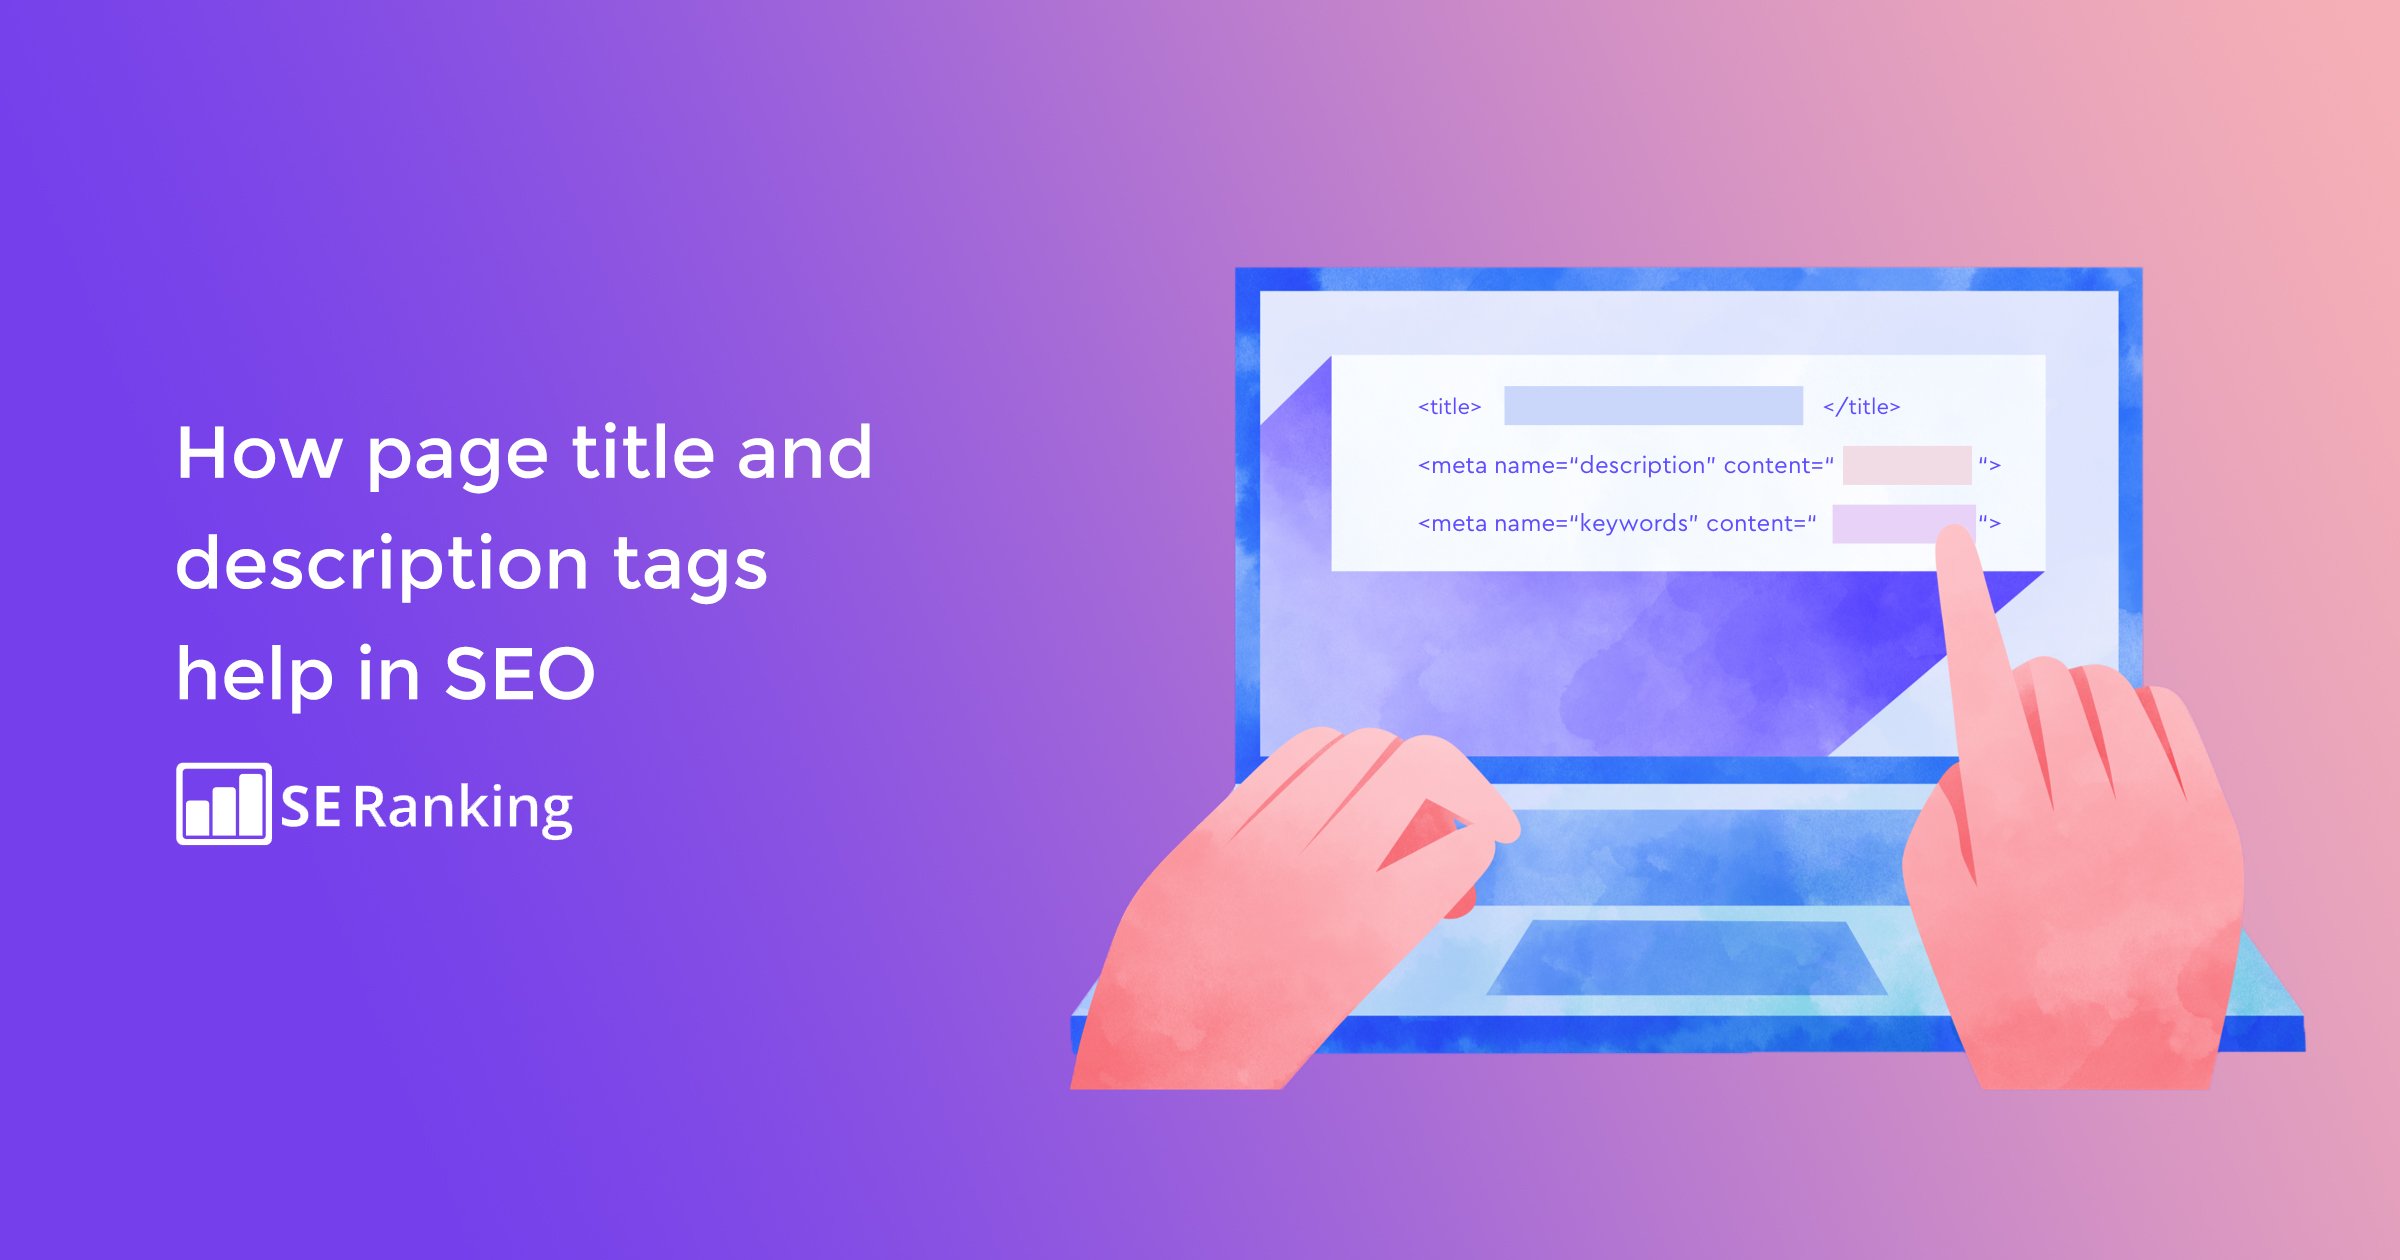 How page title and description tags help in SEO